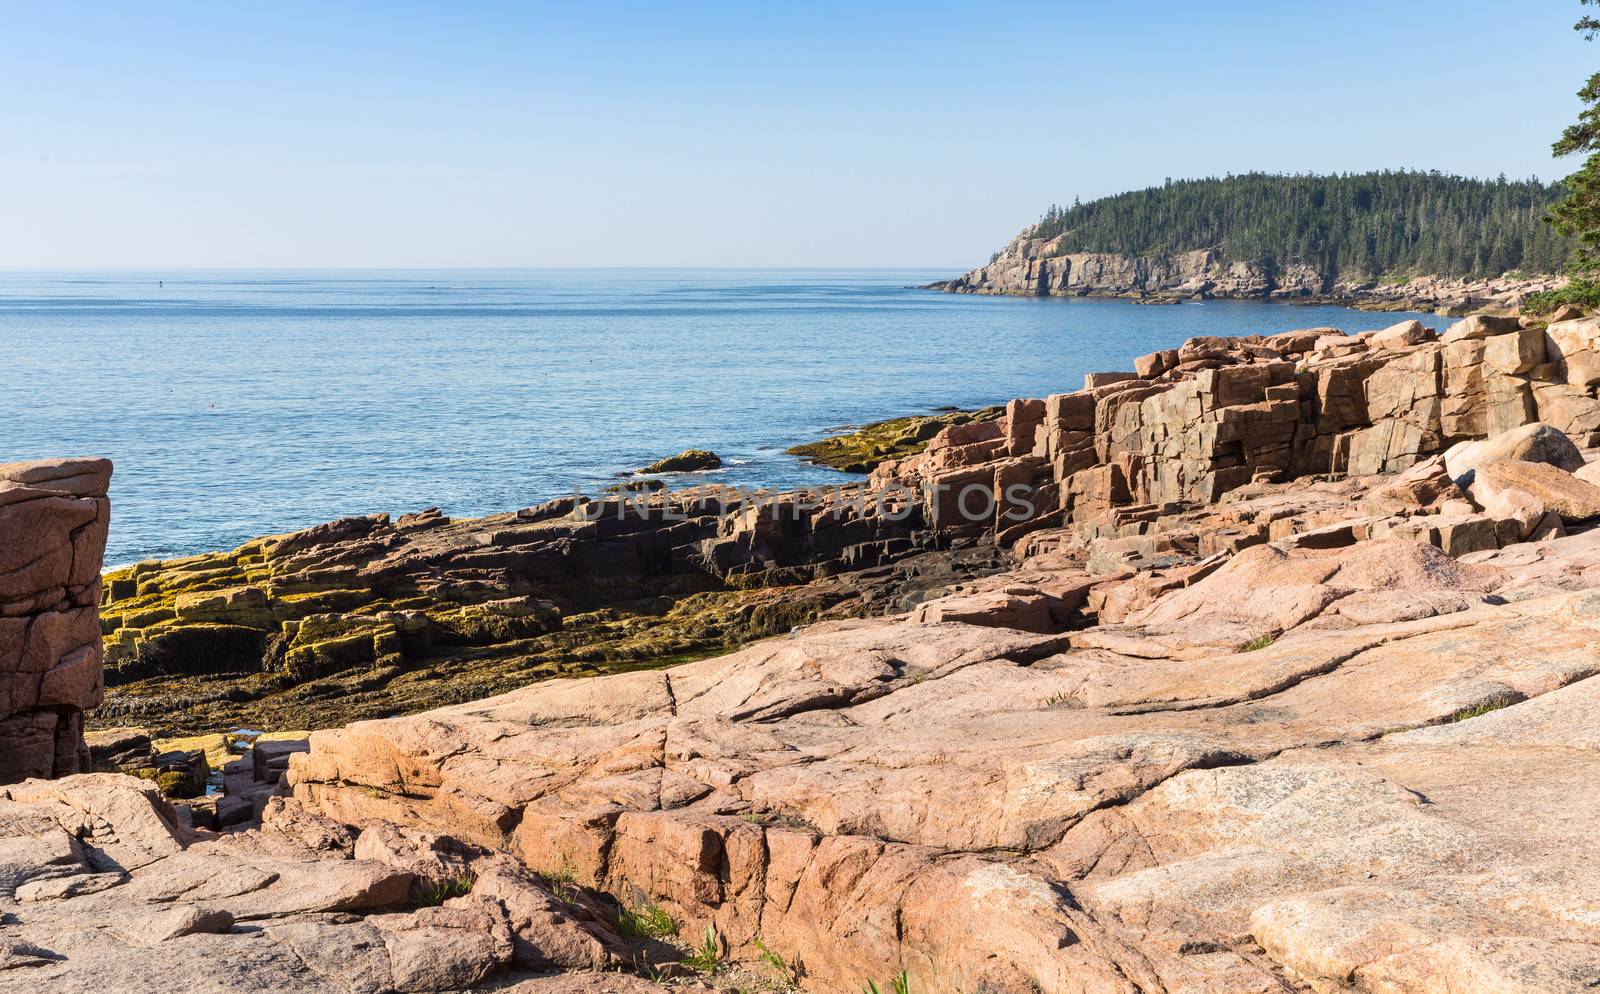 This is a view from Otter Point at Acadia Natiomal Park in Maine.